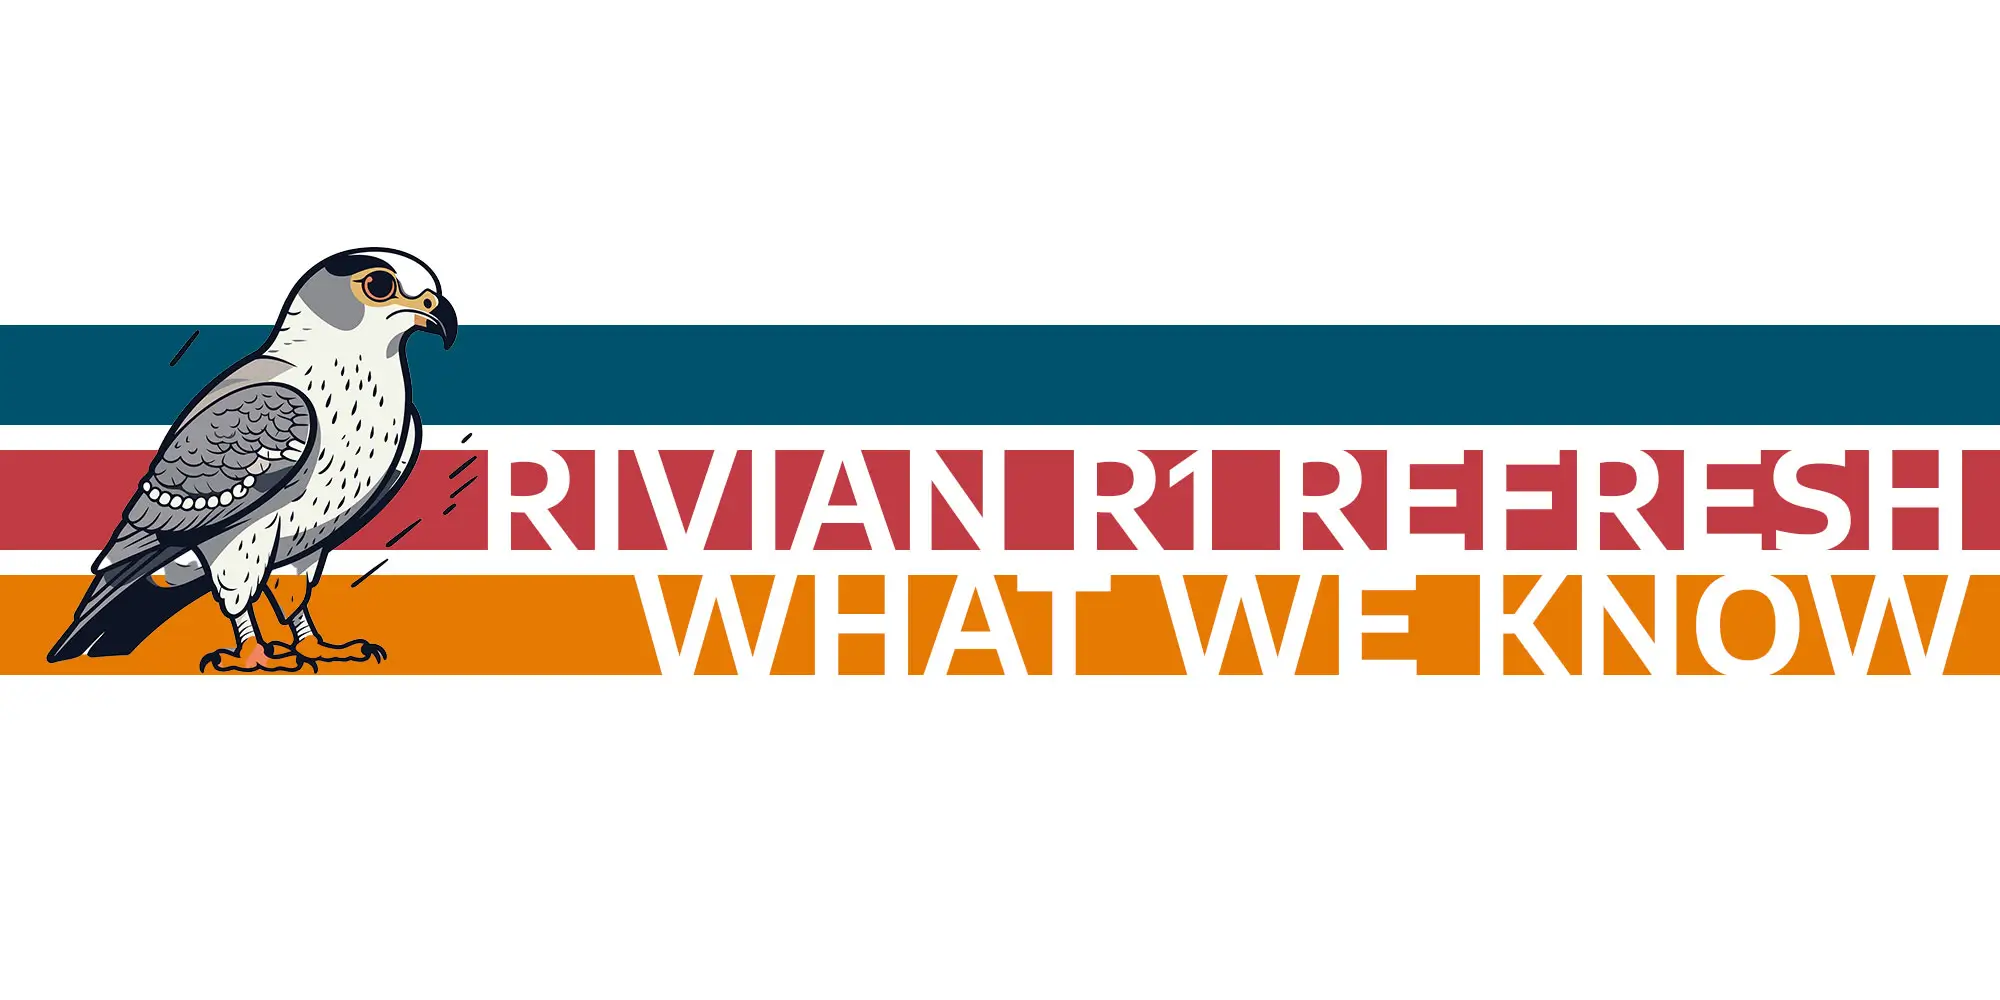 Rivian R1 Refresh What We Know Banner